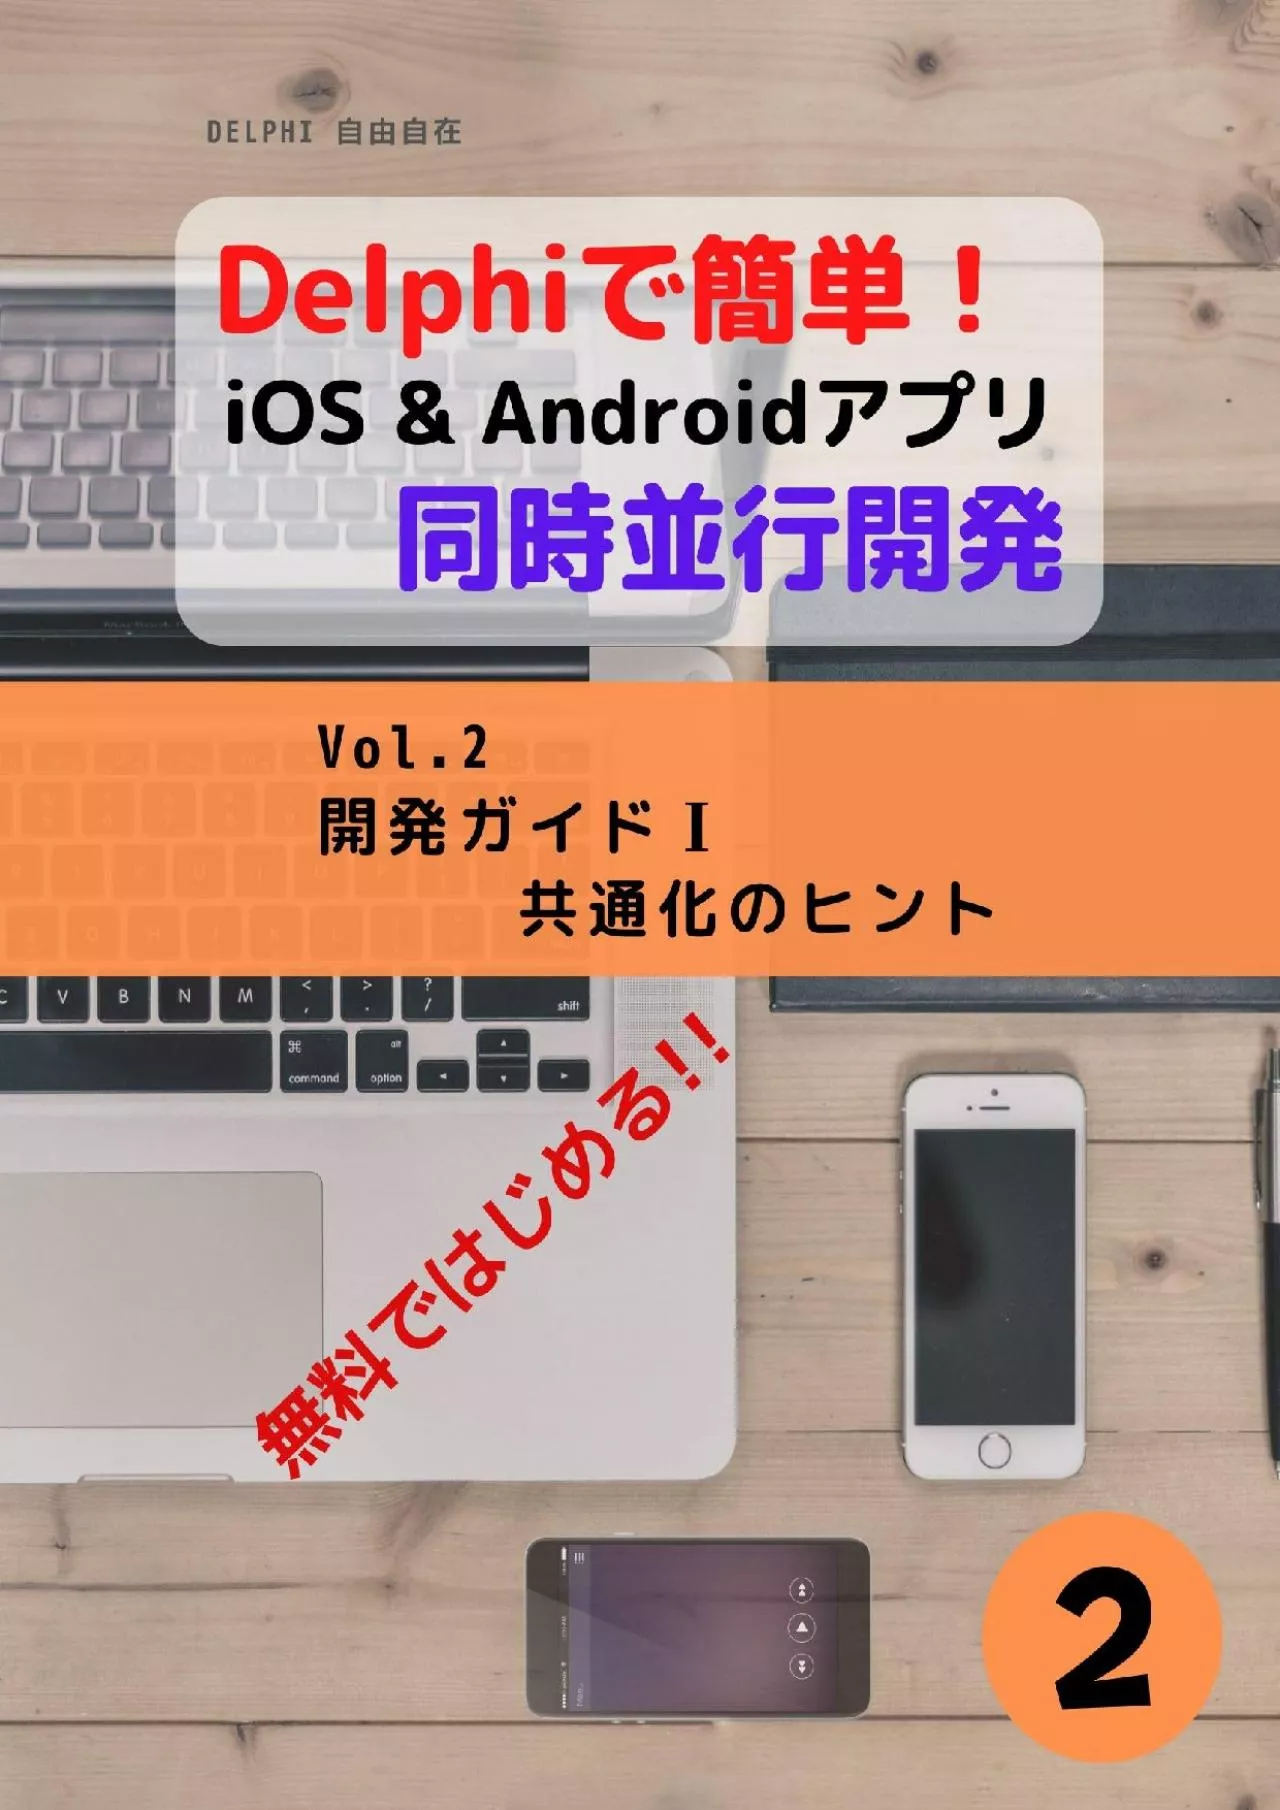 [FREE]-Delphi - Concurrent developments guide for iOS and Android Vol2: Development guide